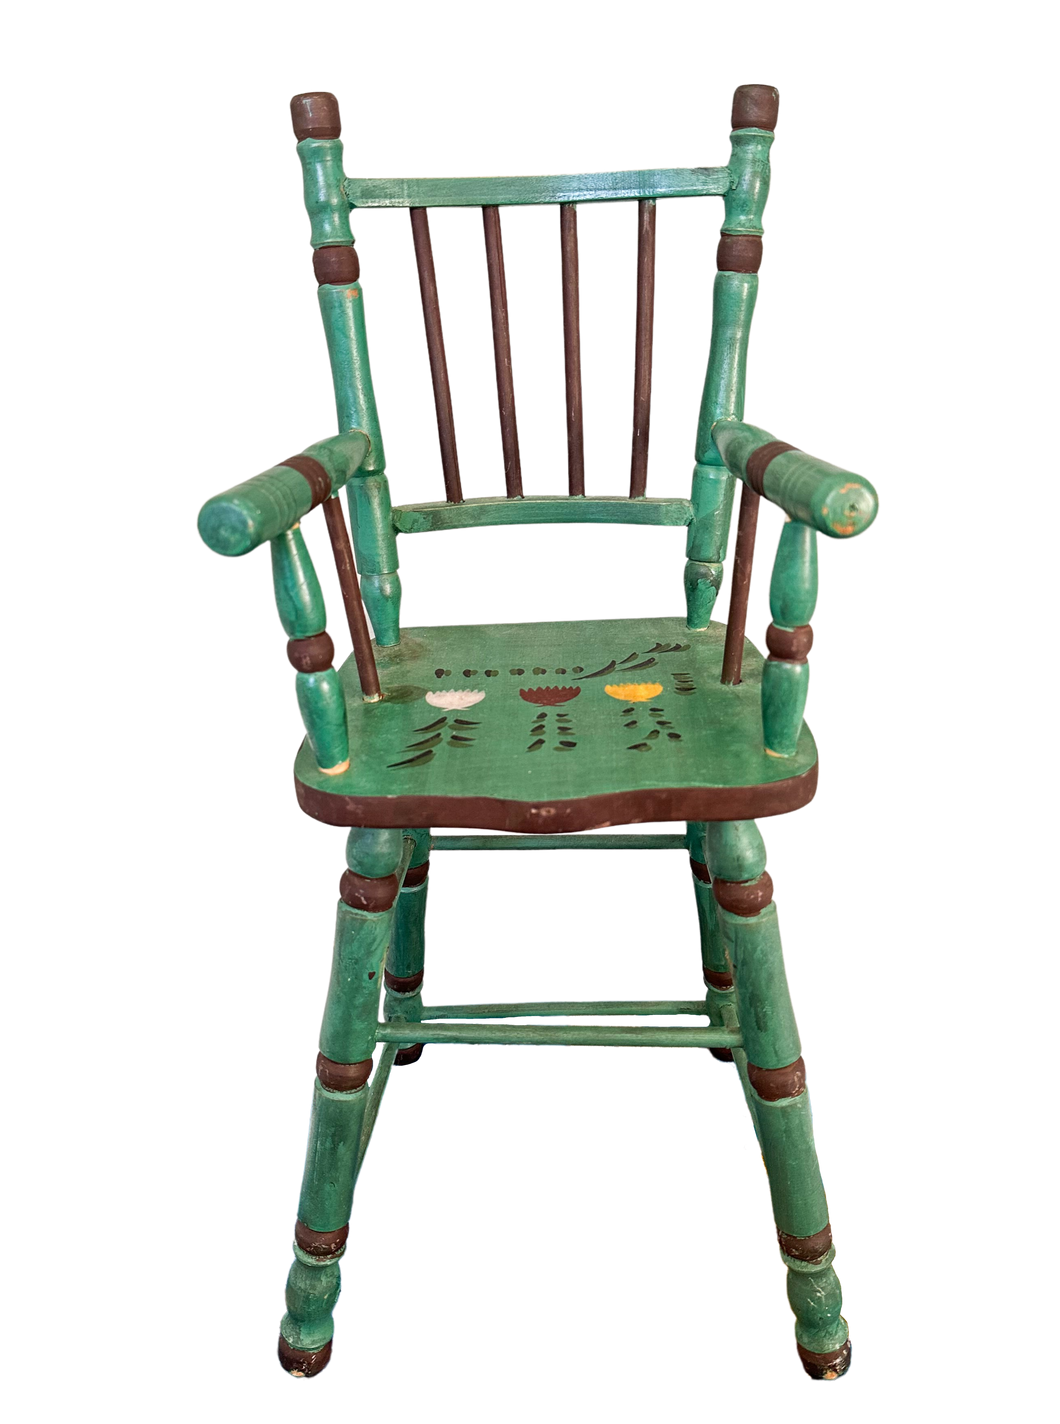 Vintage wooden folk art hand-painted doll’s highchair with floral tulip design - Moppet